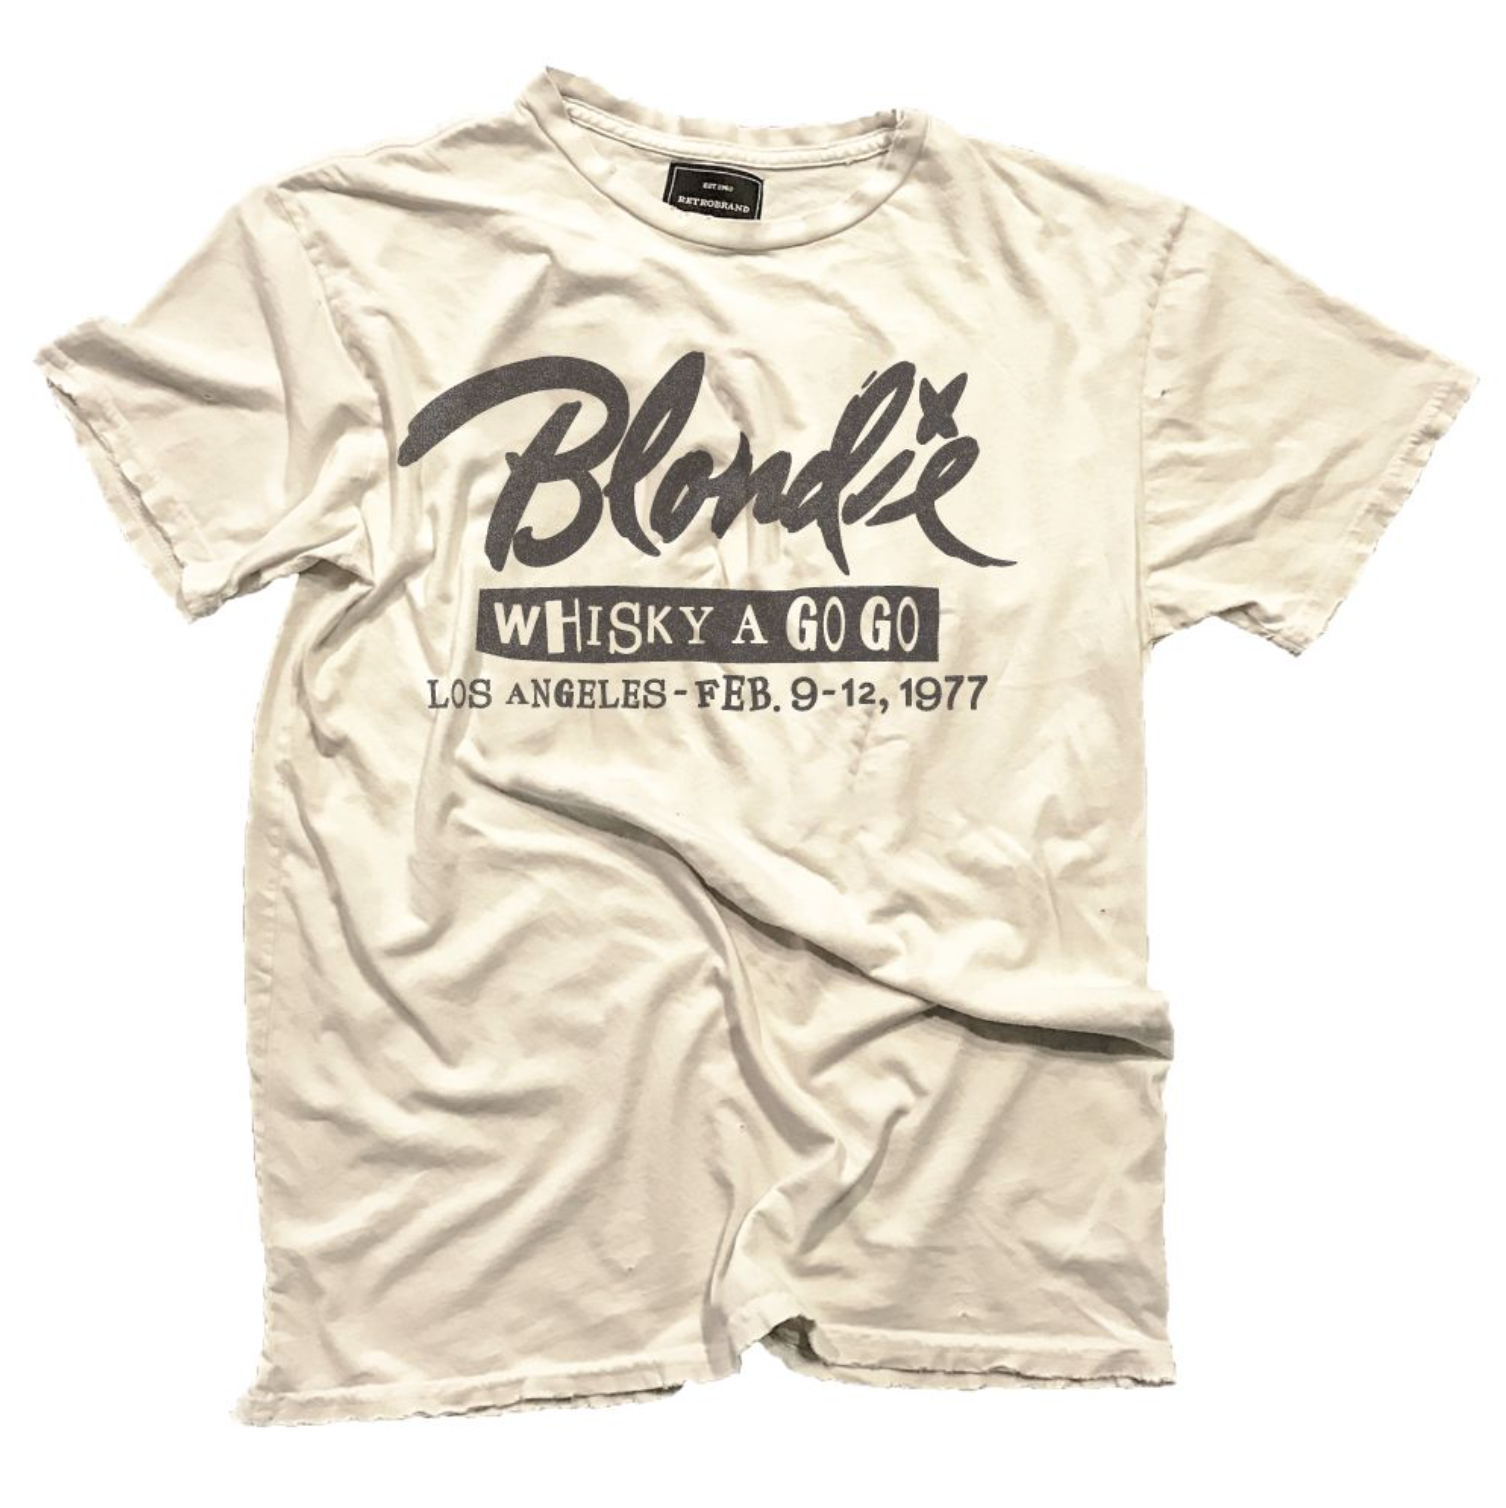 Blondie Whisky a Go GO Los Angeles Feb 9-12 1977 in black on our 100% cotton Black Label short sleeve tee in antique white.